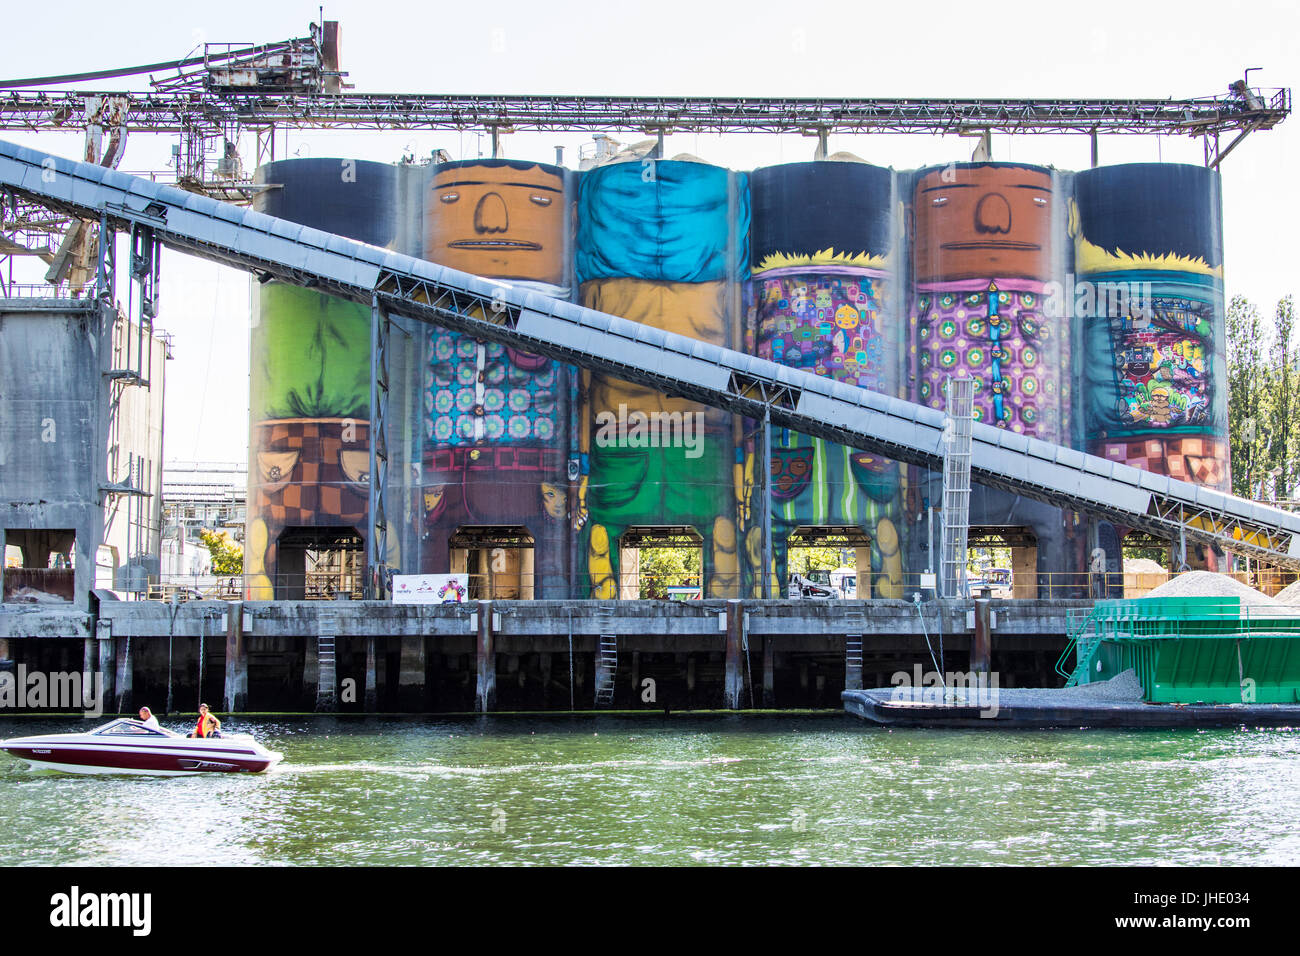 'Giants', public art made from Silos by Os Gemeos, Granville Island, Vancouver, British Columbia, Canada Stock Photo